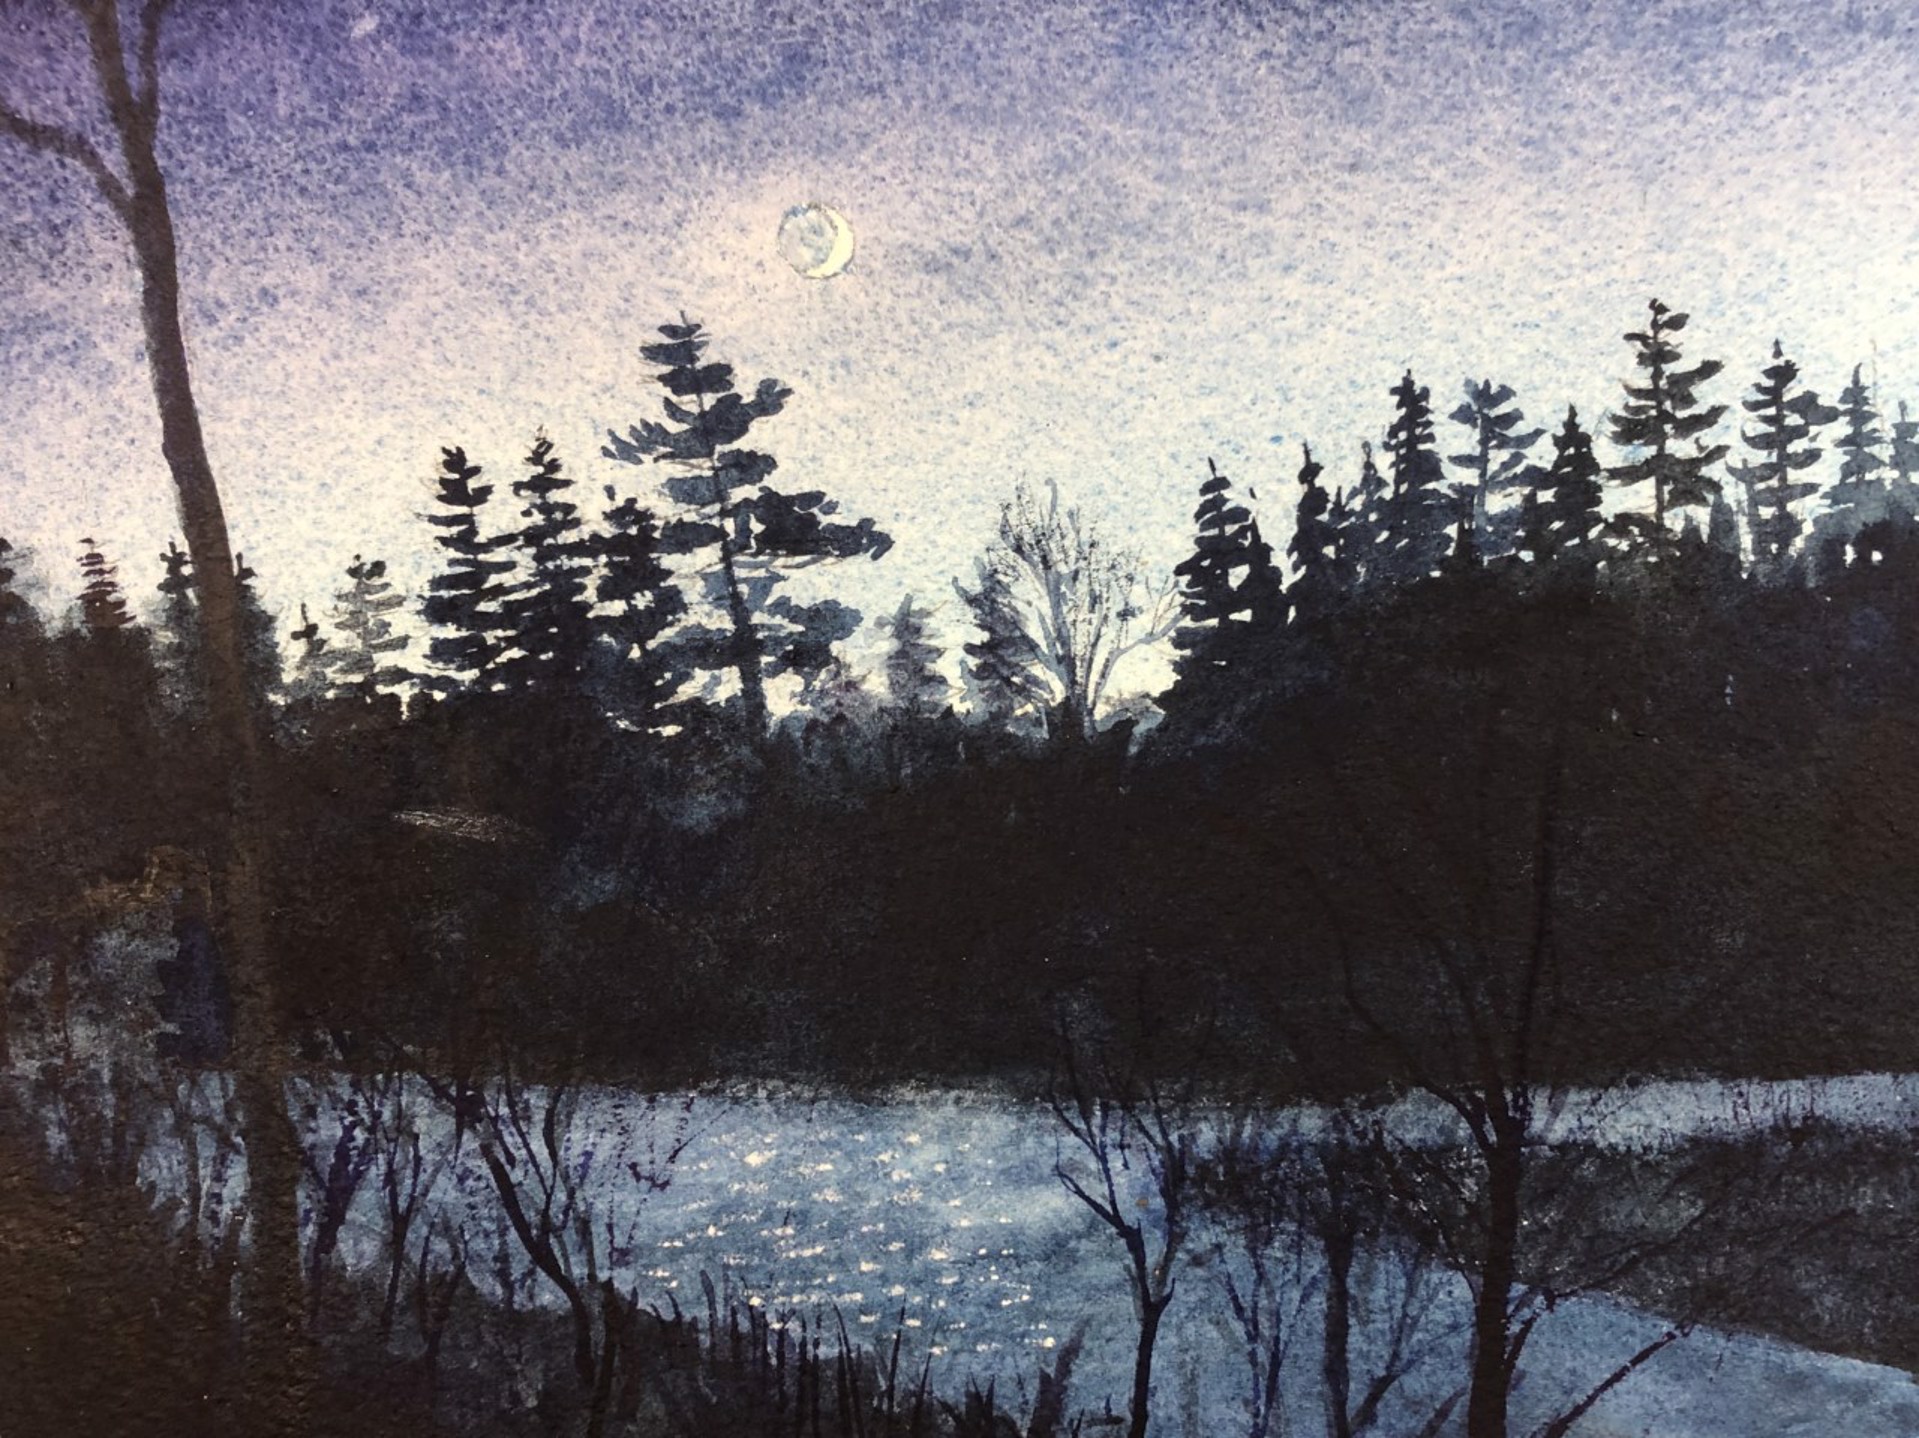 Webster Stream at Night by Dan Daly